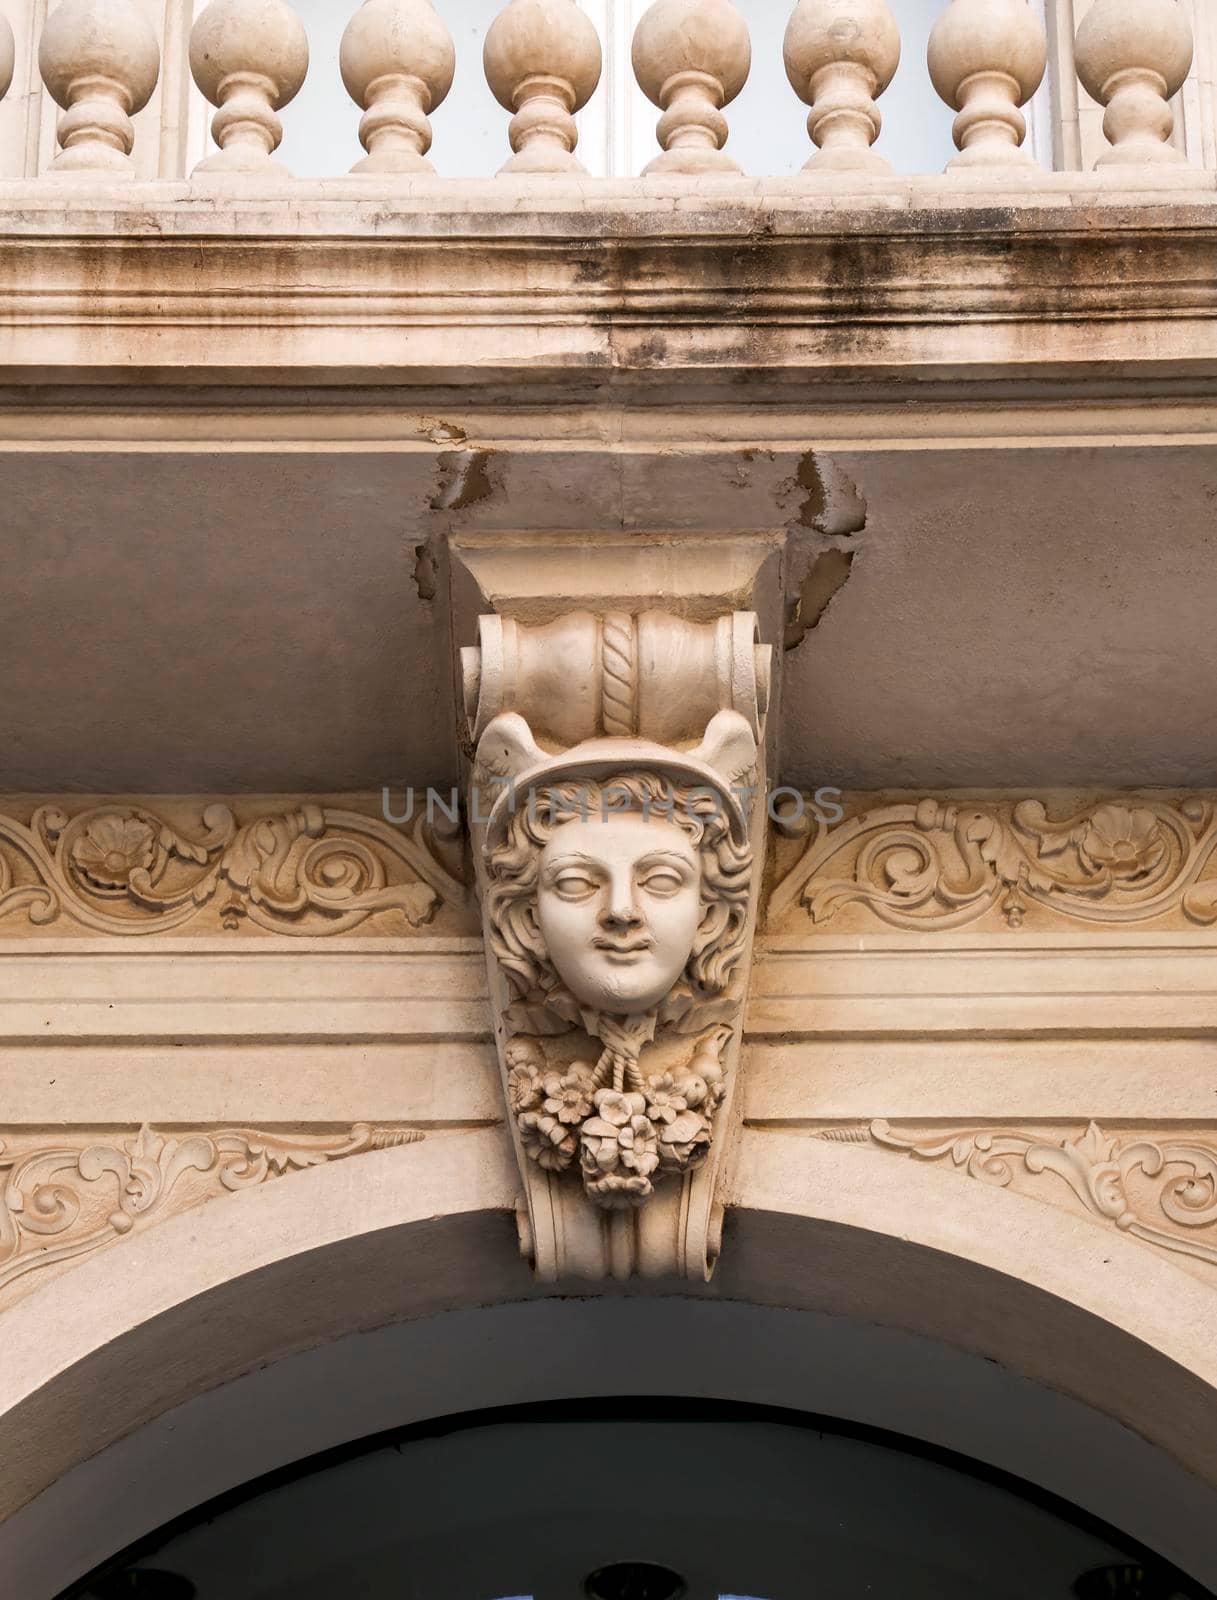 Modernist details on carved stone on a facade in Cartagena by soniabonet